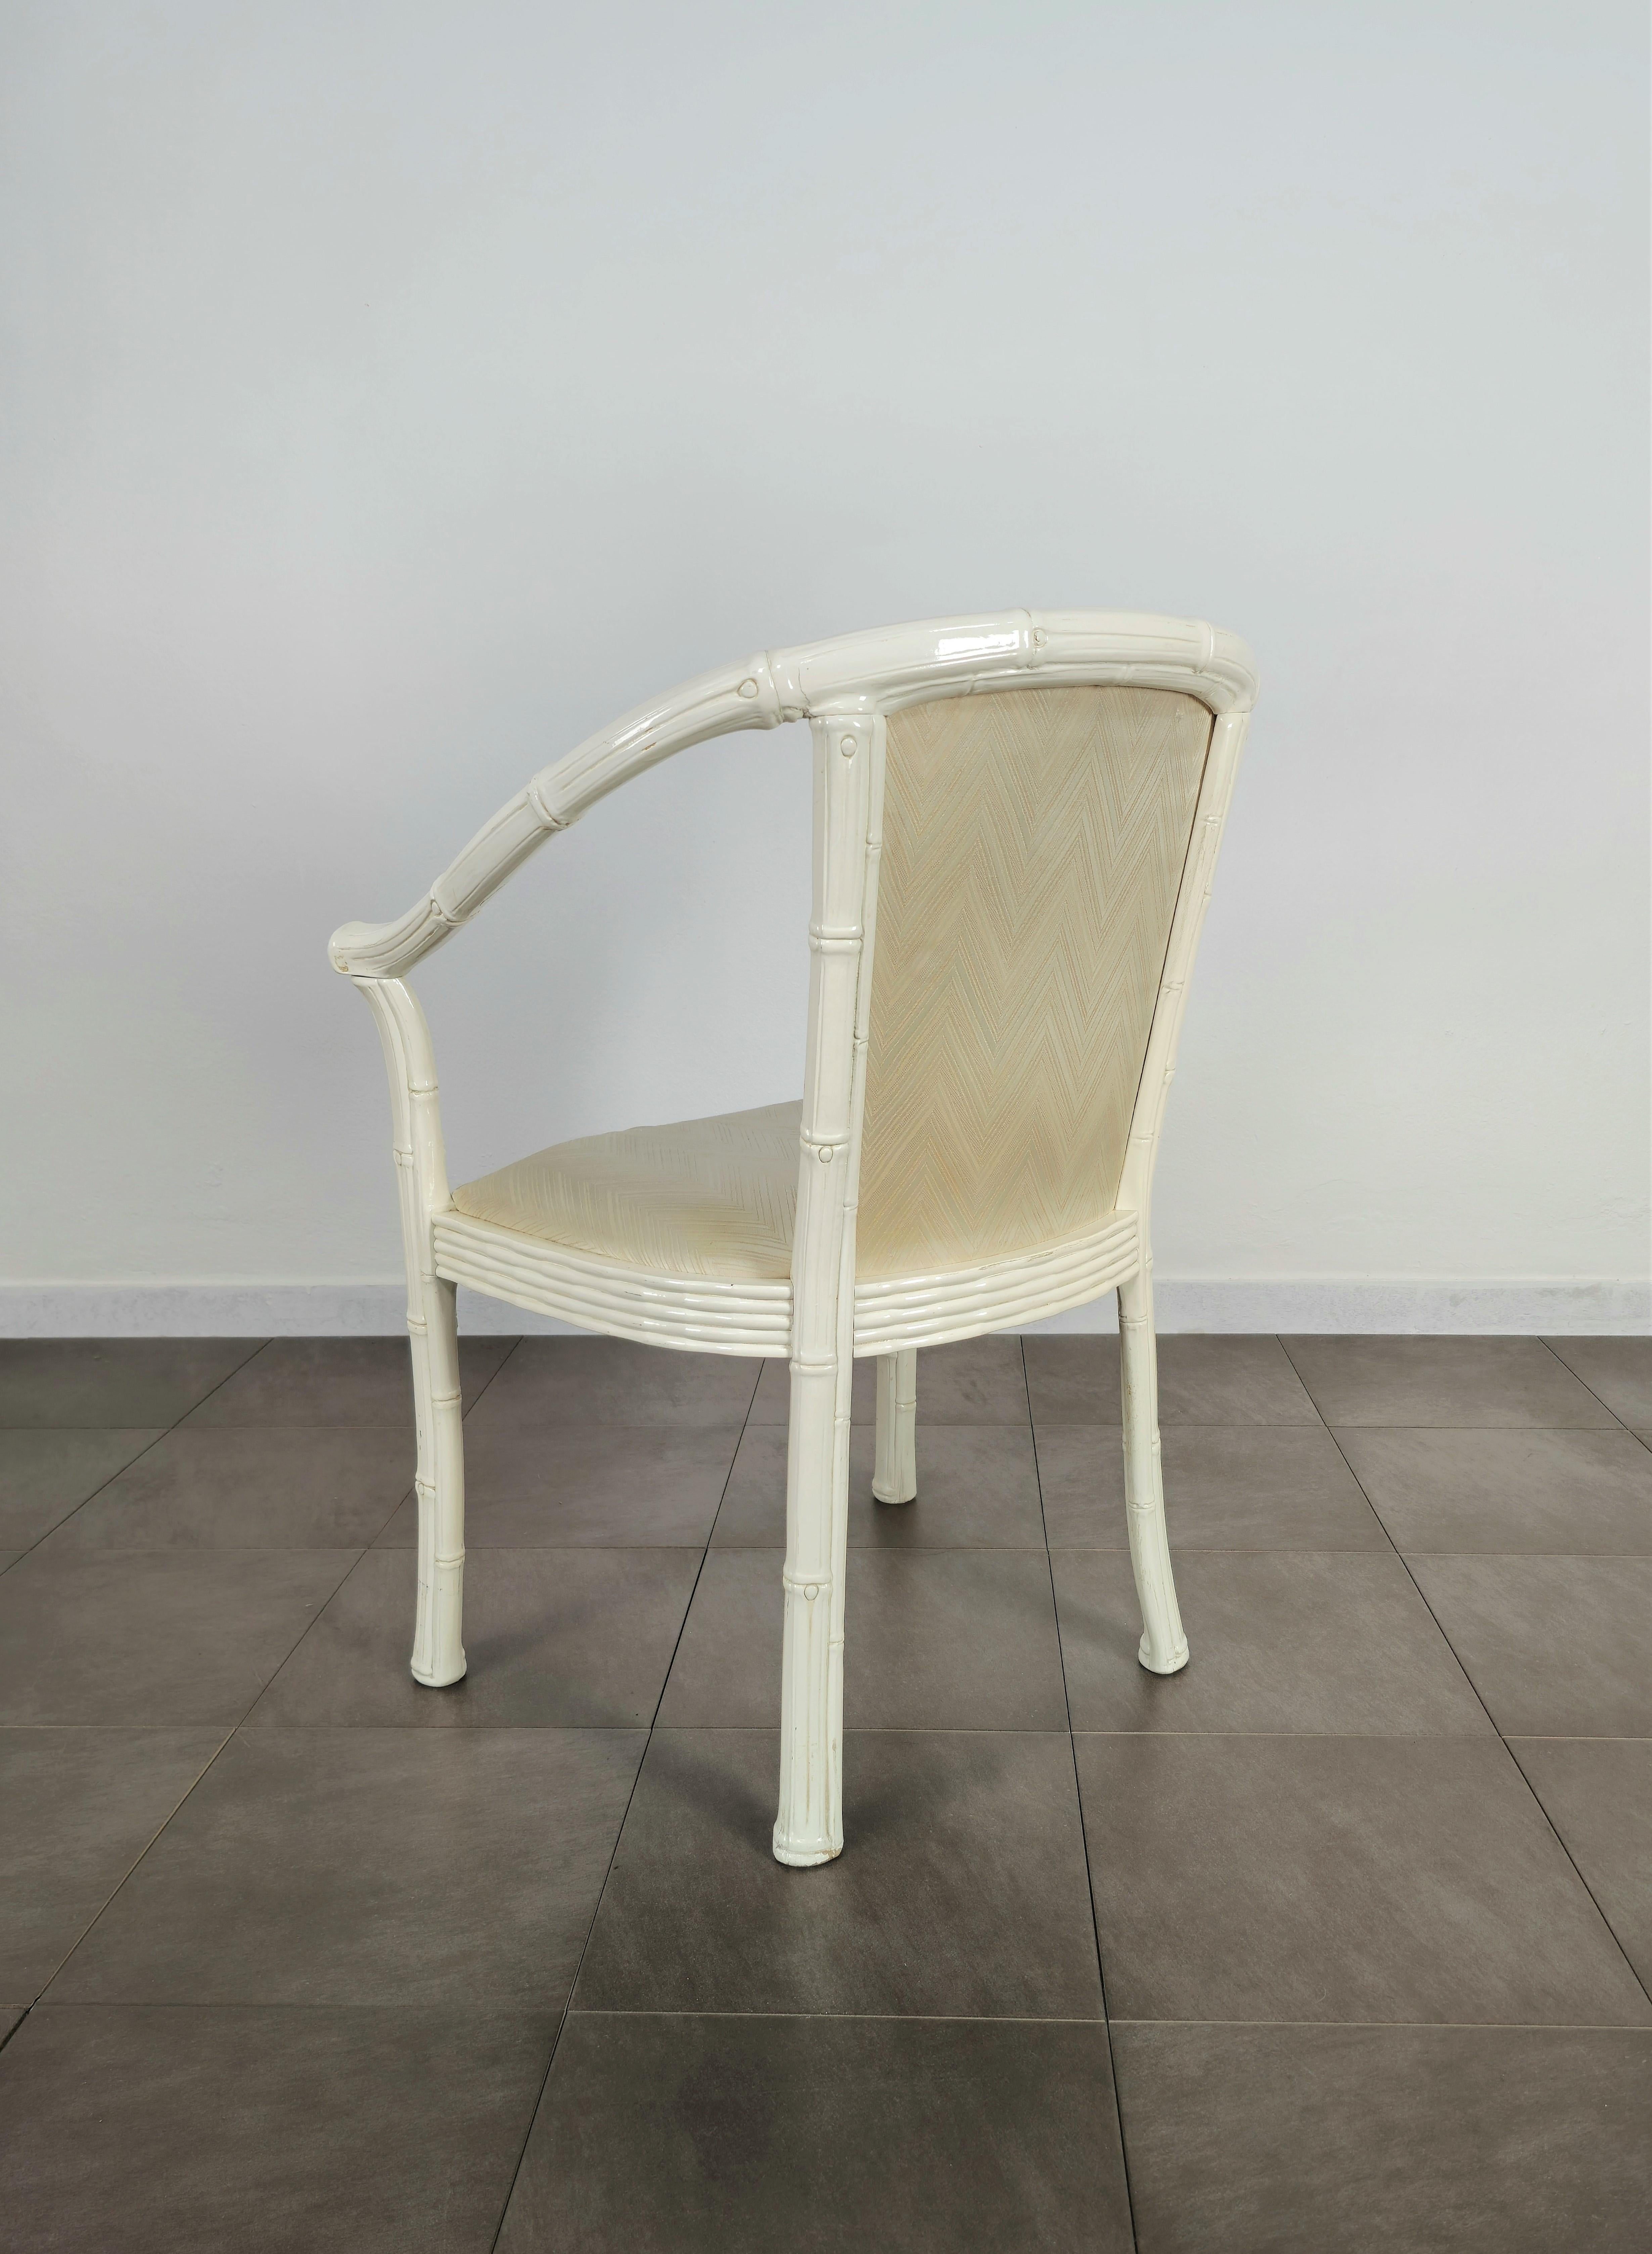 Midcentury Chair White Enamelled Bamboo Fabric Italian Design, 1960s In Fair Condition For Sale In Palermo, IT